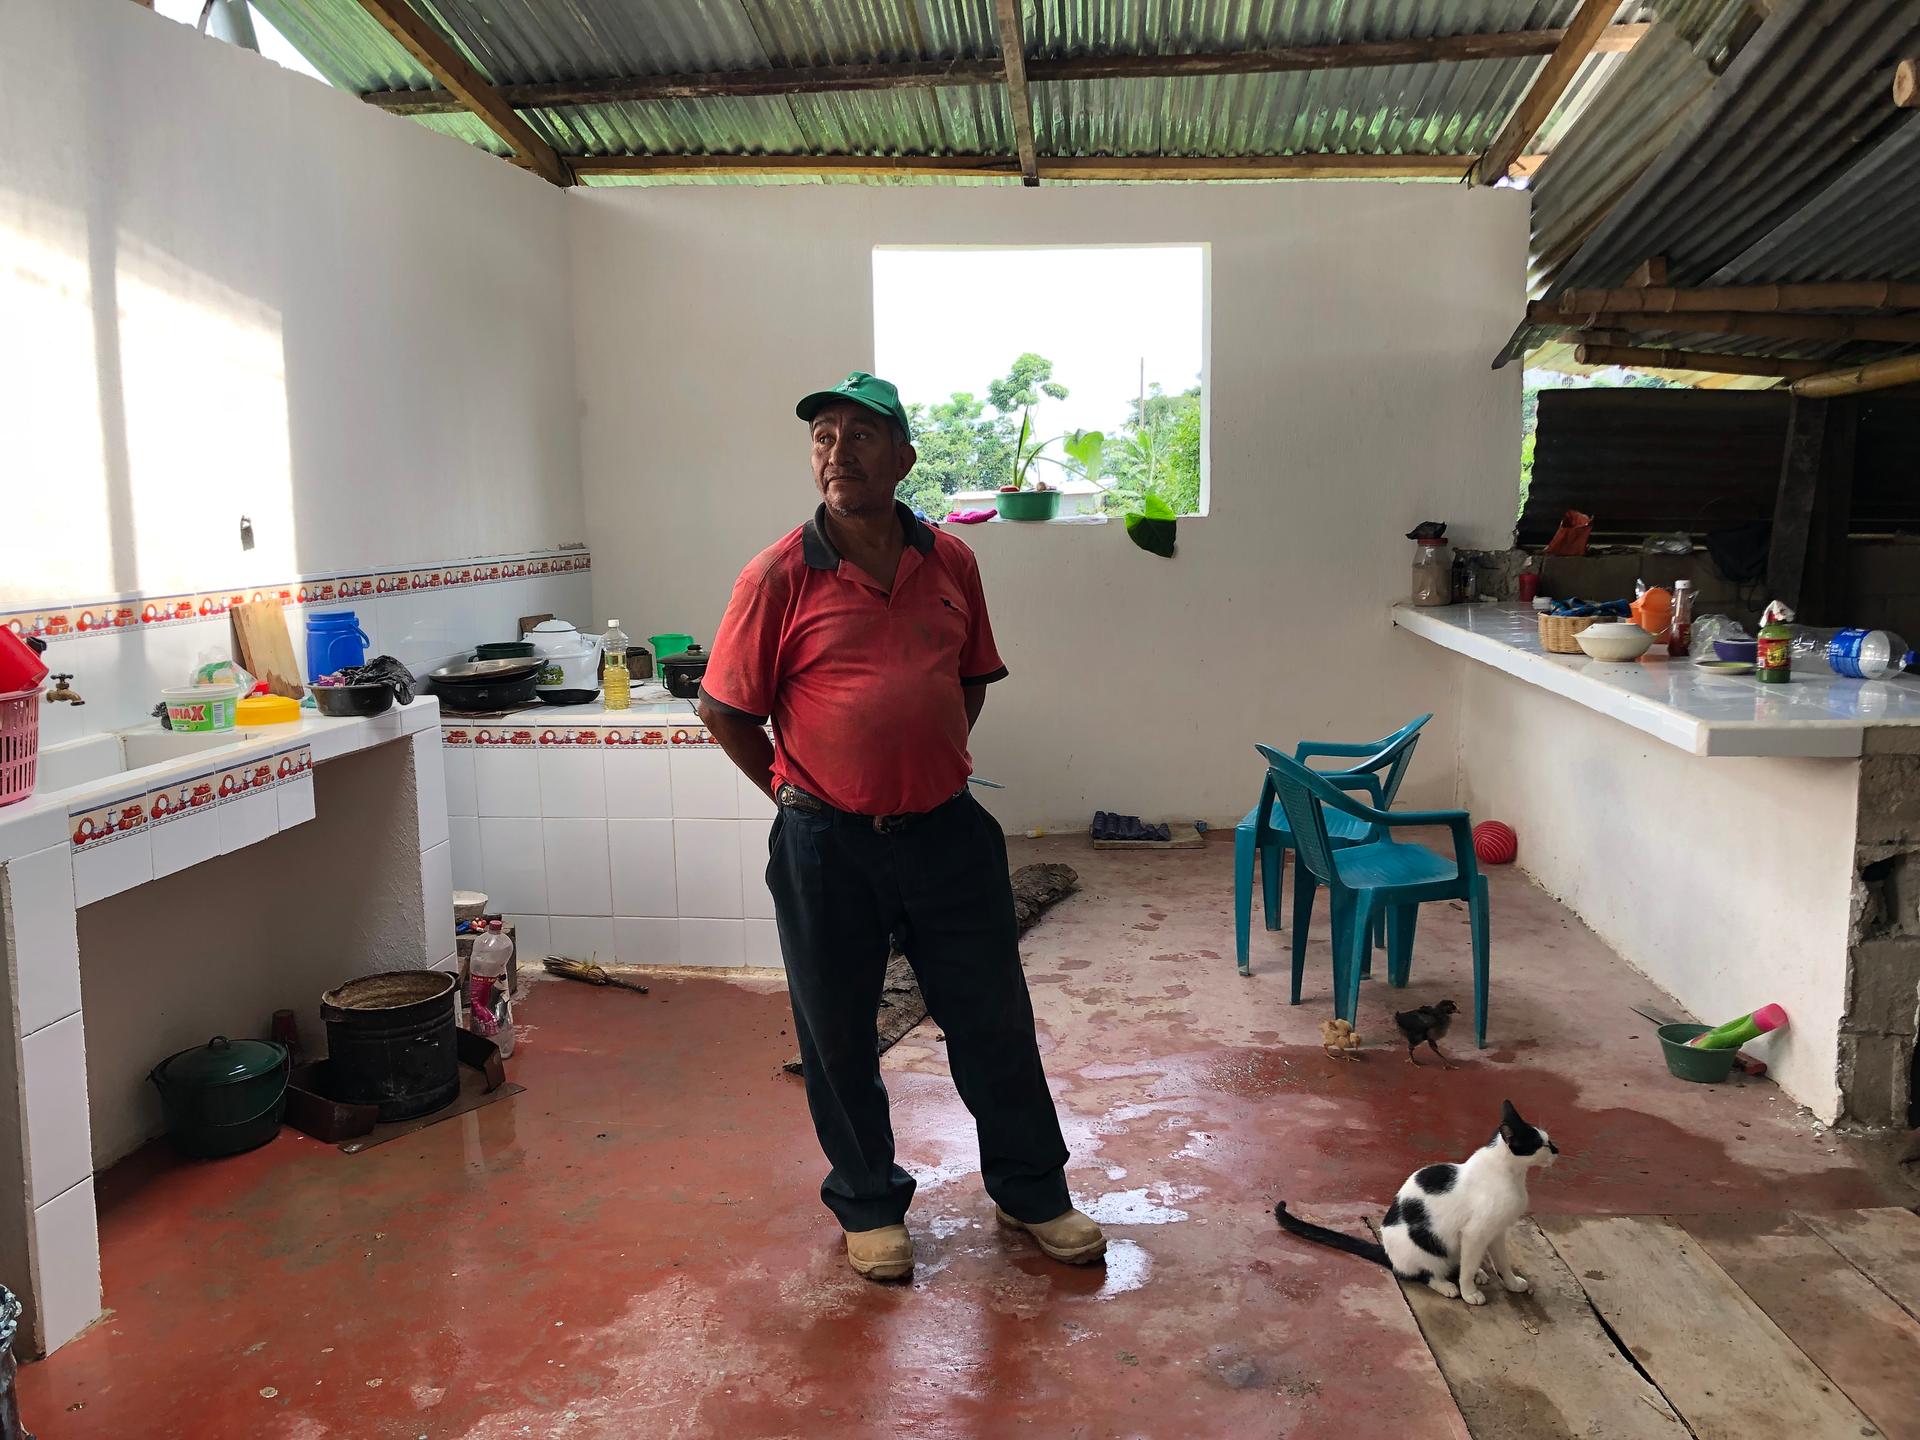 A man stands inside a newly built house in Guatemala built with remittance money from his son, who lives and works in the US. 